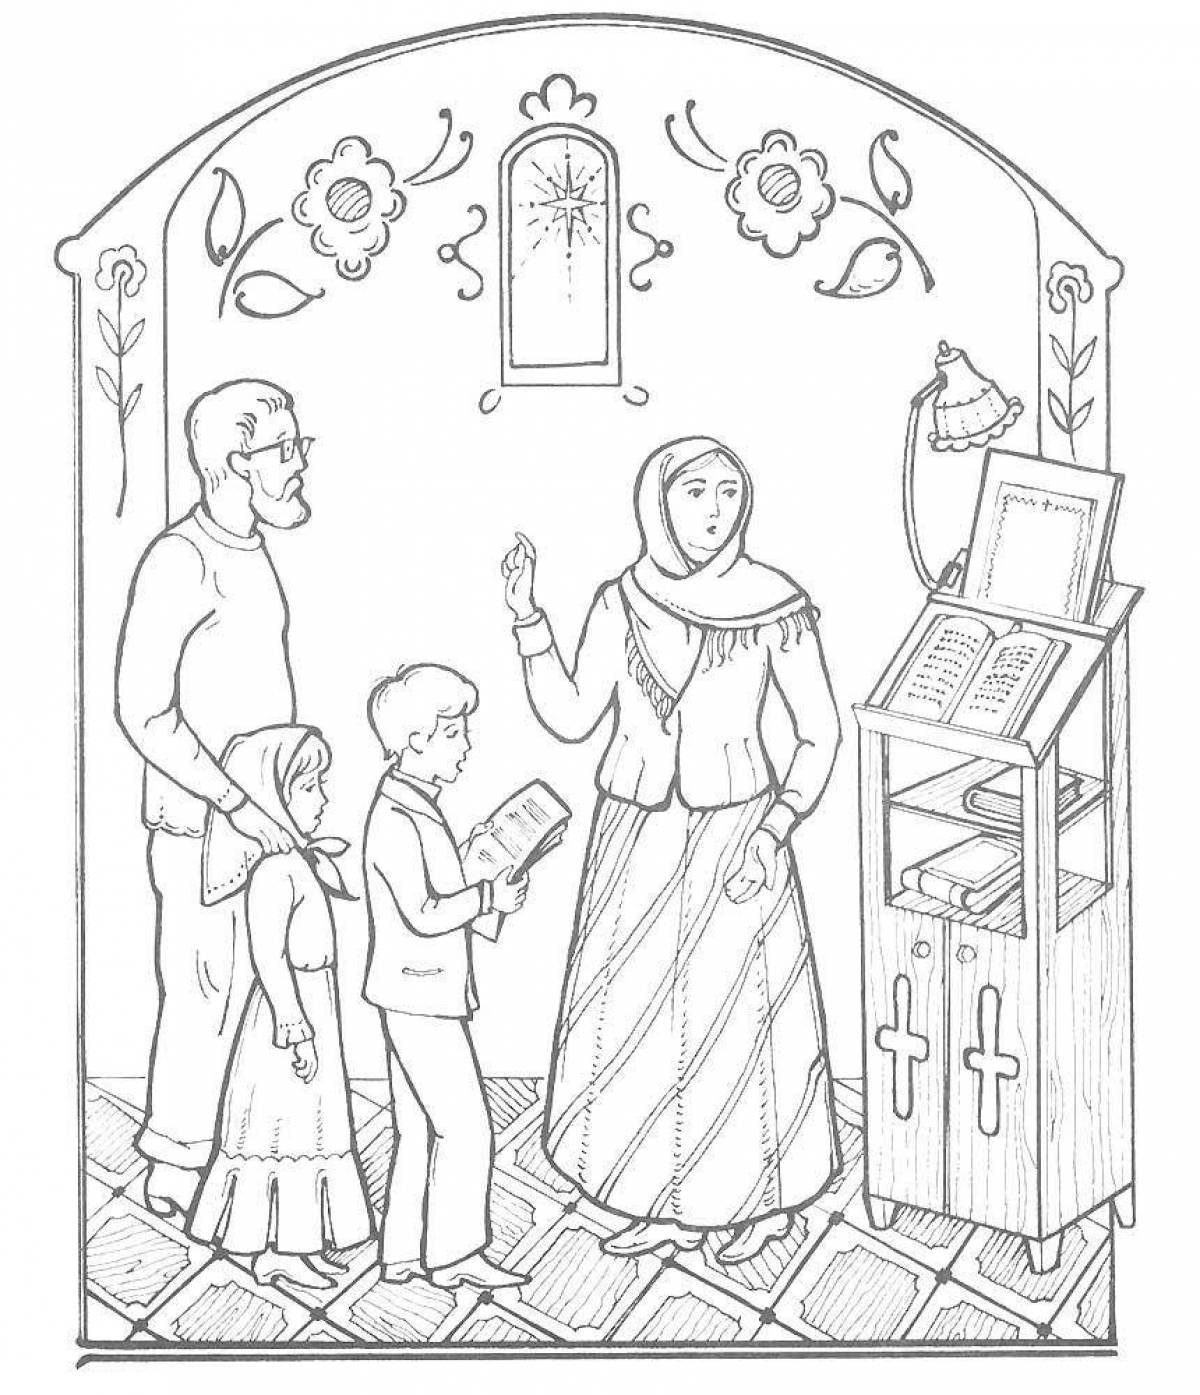 Shiny orthodox coloring book